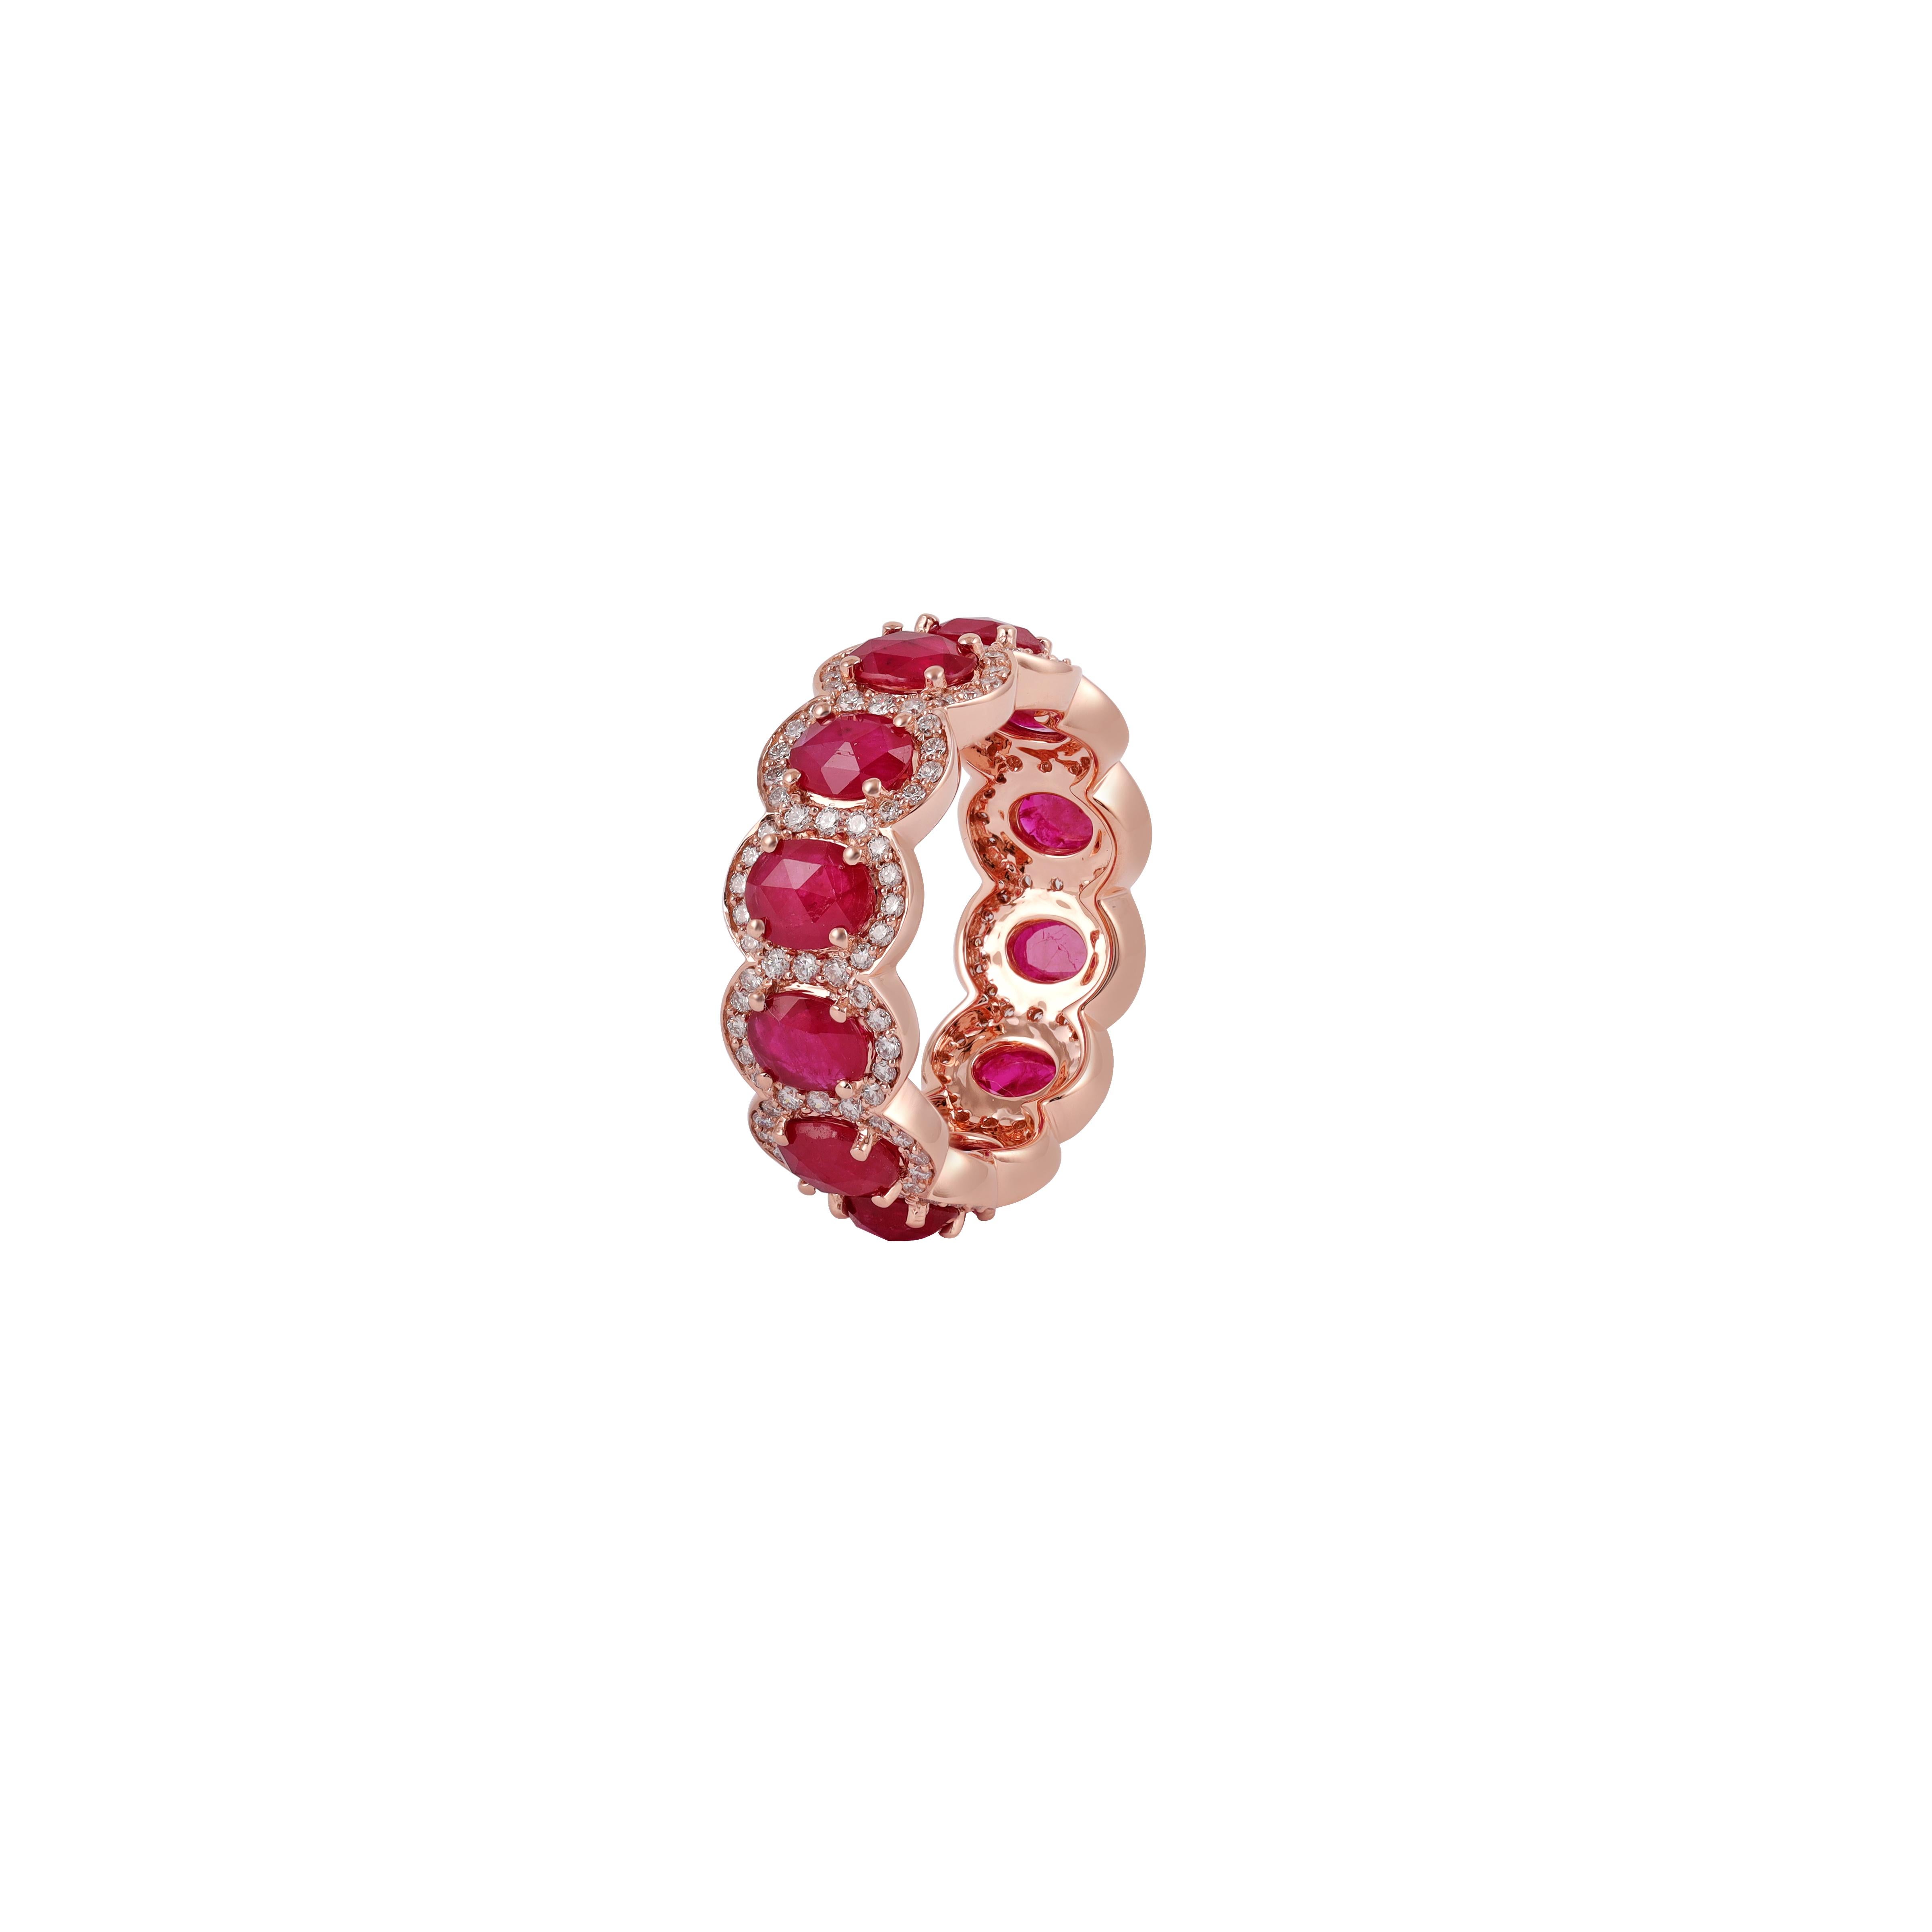 Handcrafted Oval Ruby Band with brilliant round cut Diamond 
12 Oval Ruby - 4.14 CTS
156 Brilliant round cut Diamond - 1.01 CTS
18 Karat Rose Gold - 6.2 Grams
